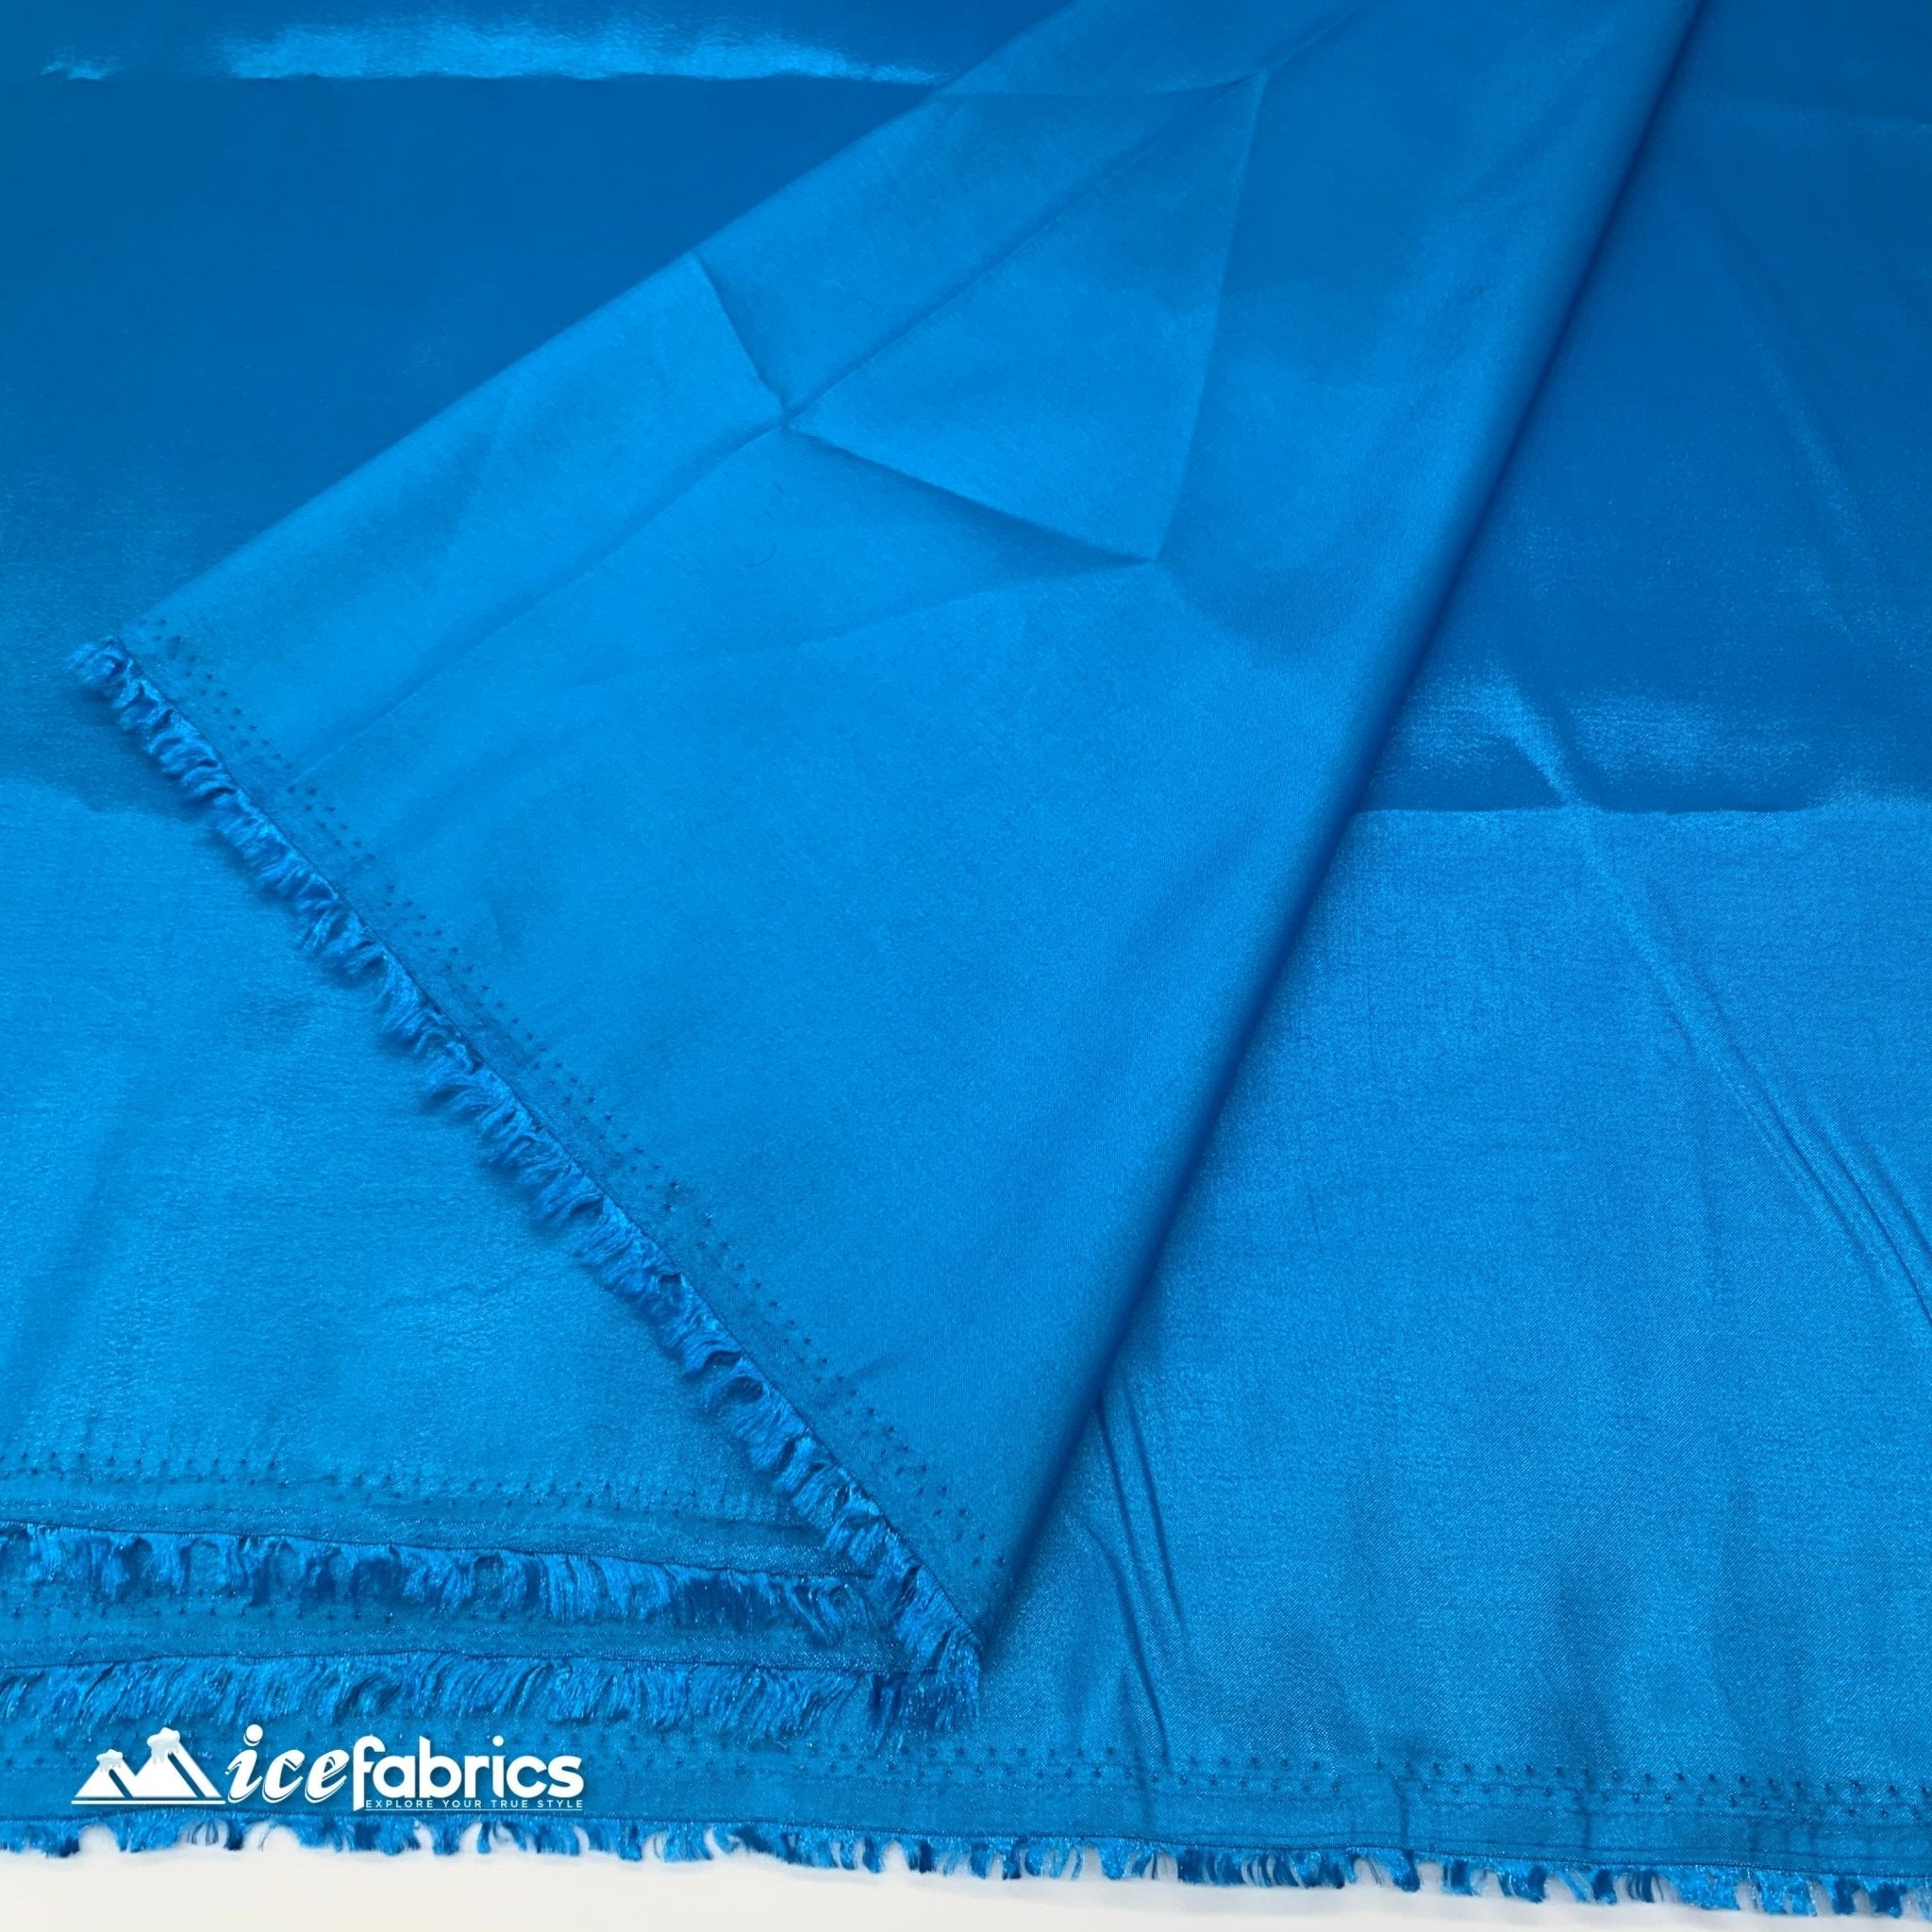 High Quality Solid Taffeta Fabric_ 60" Width_ By The YardTaffeta FabricICEFABRICICE FABRICSNavy blueHigh Quality Solid Taffeta Fabric_ 60" Width_ By The YardTaffeta FabricICEFABRICICE FABRICSTurquoiseHigh Quality Solid Taffeta Fabric_ 60" Width_ By The Yard ICEFABRIC Turquoise